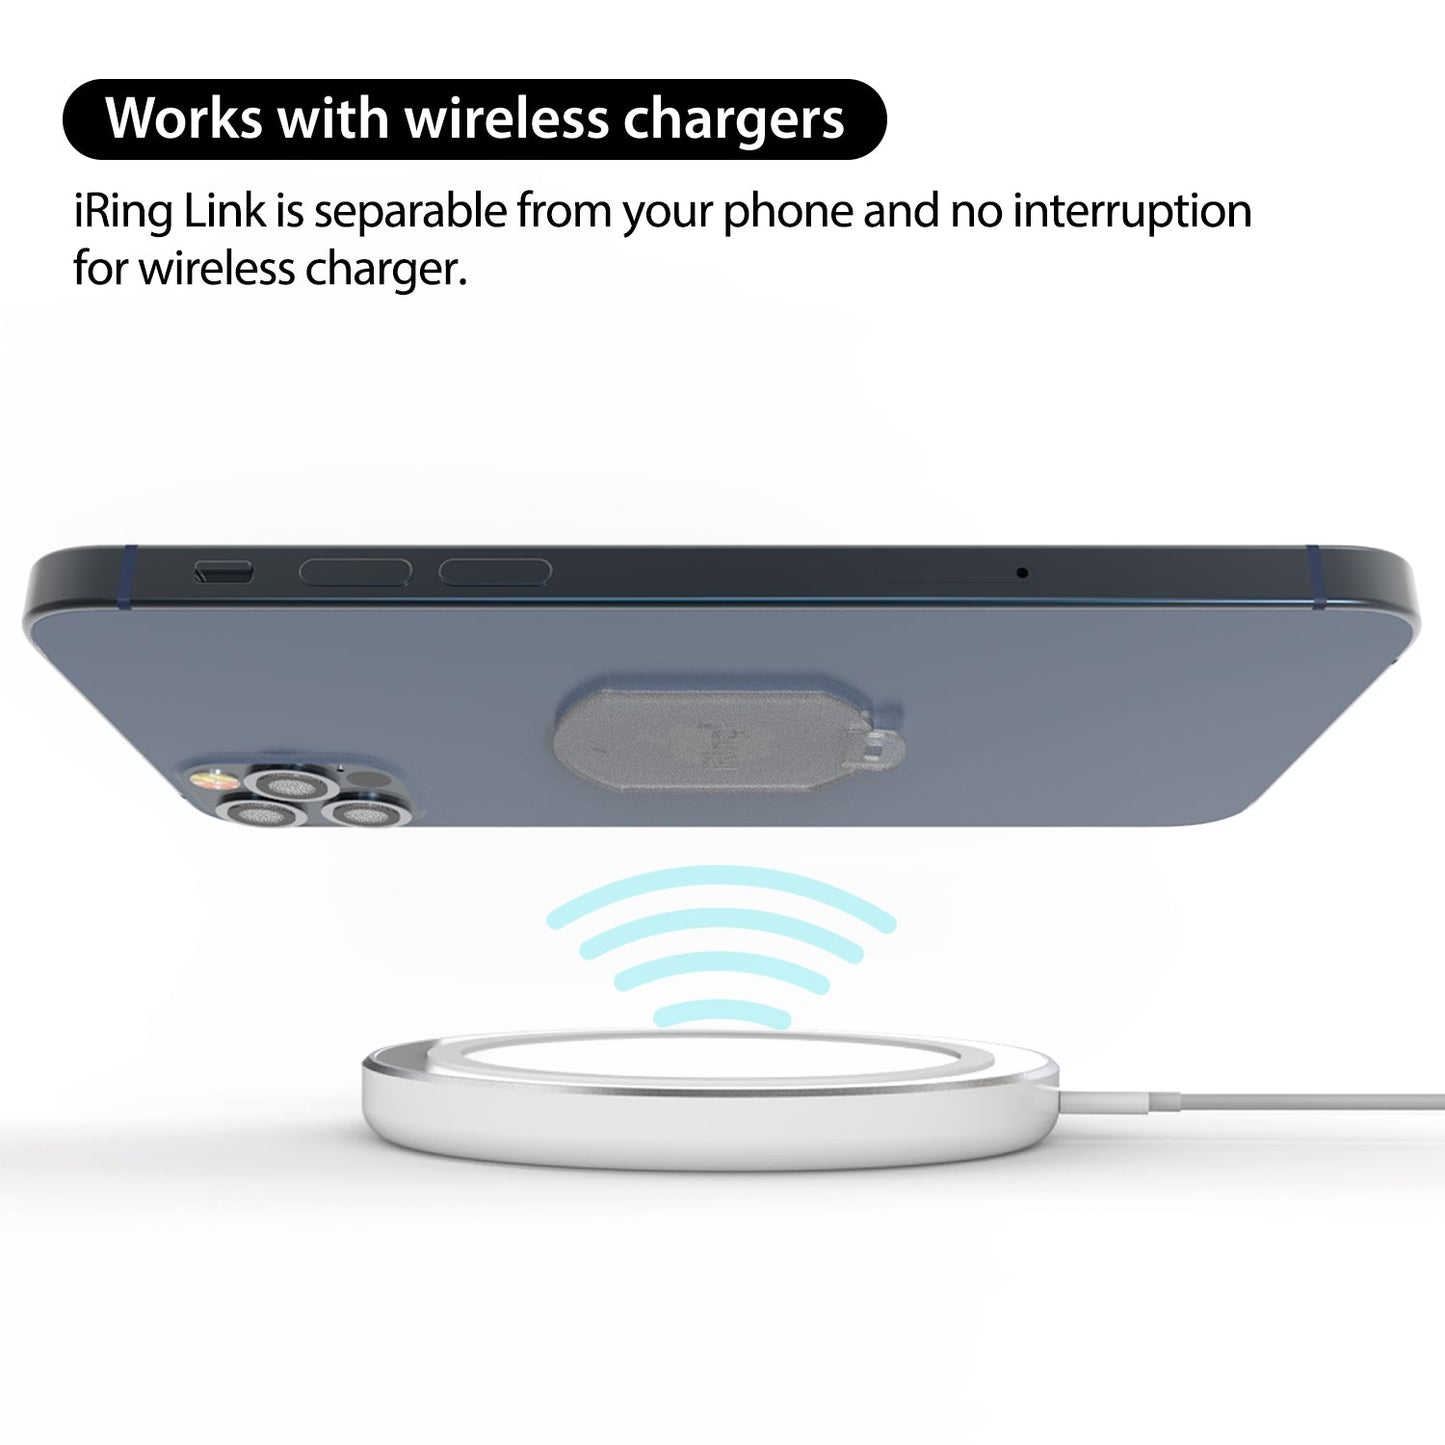 iRing POP - Works with wireless chargers